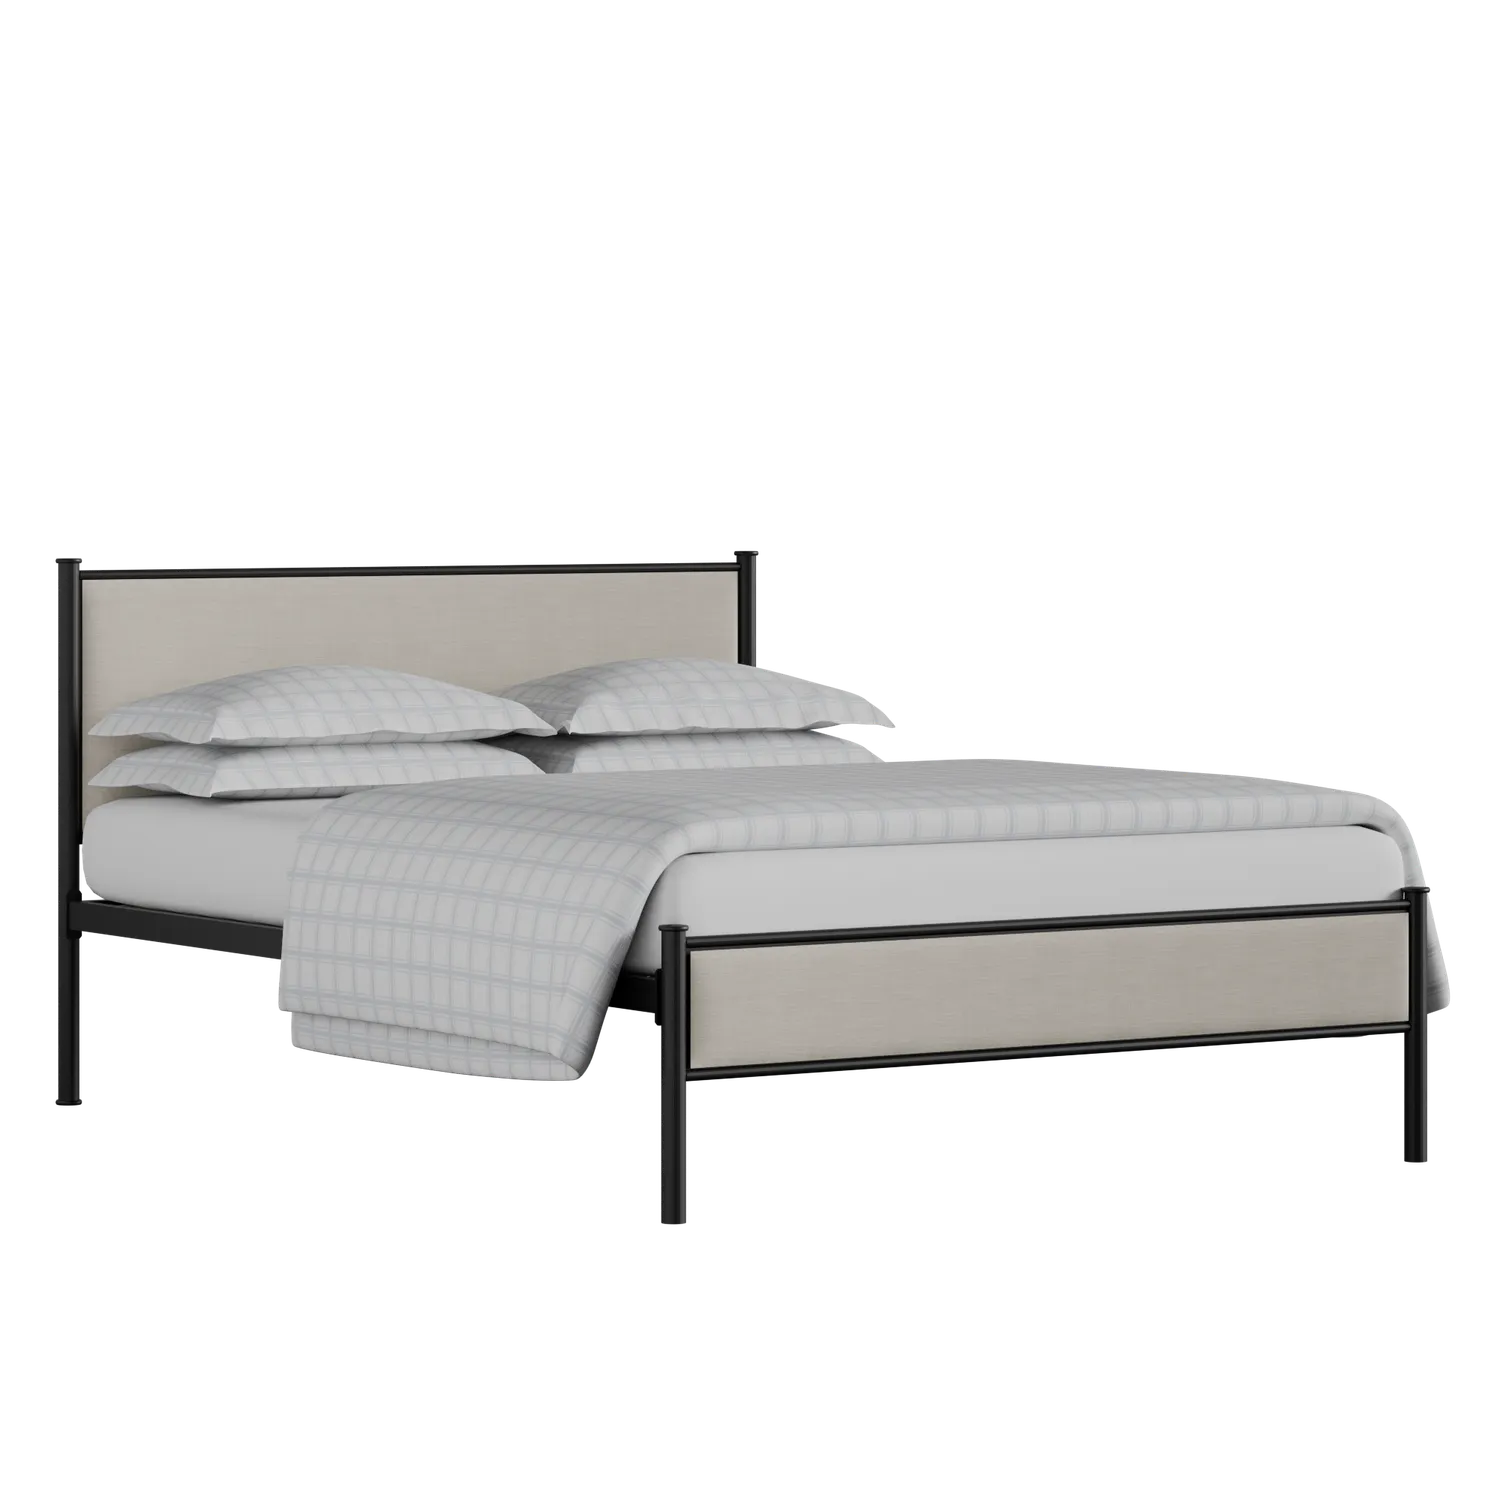 Brest iron/metal upholstered bed in black with mist fabric